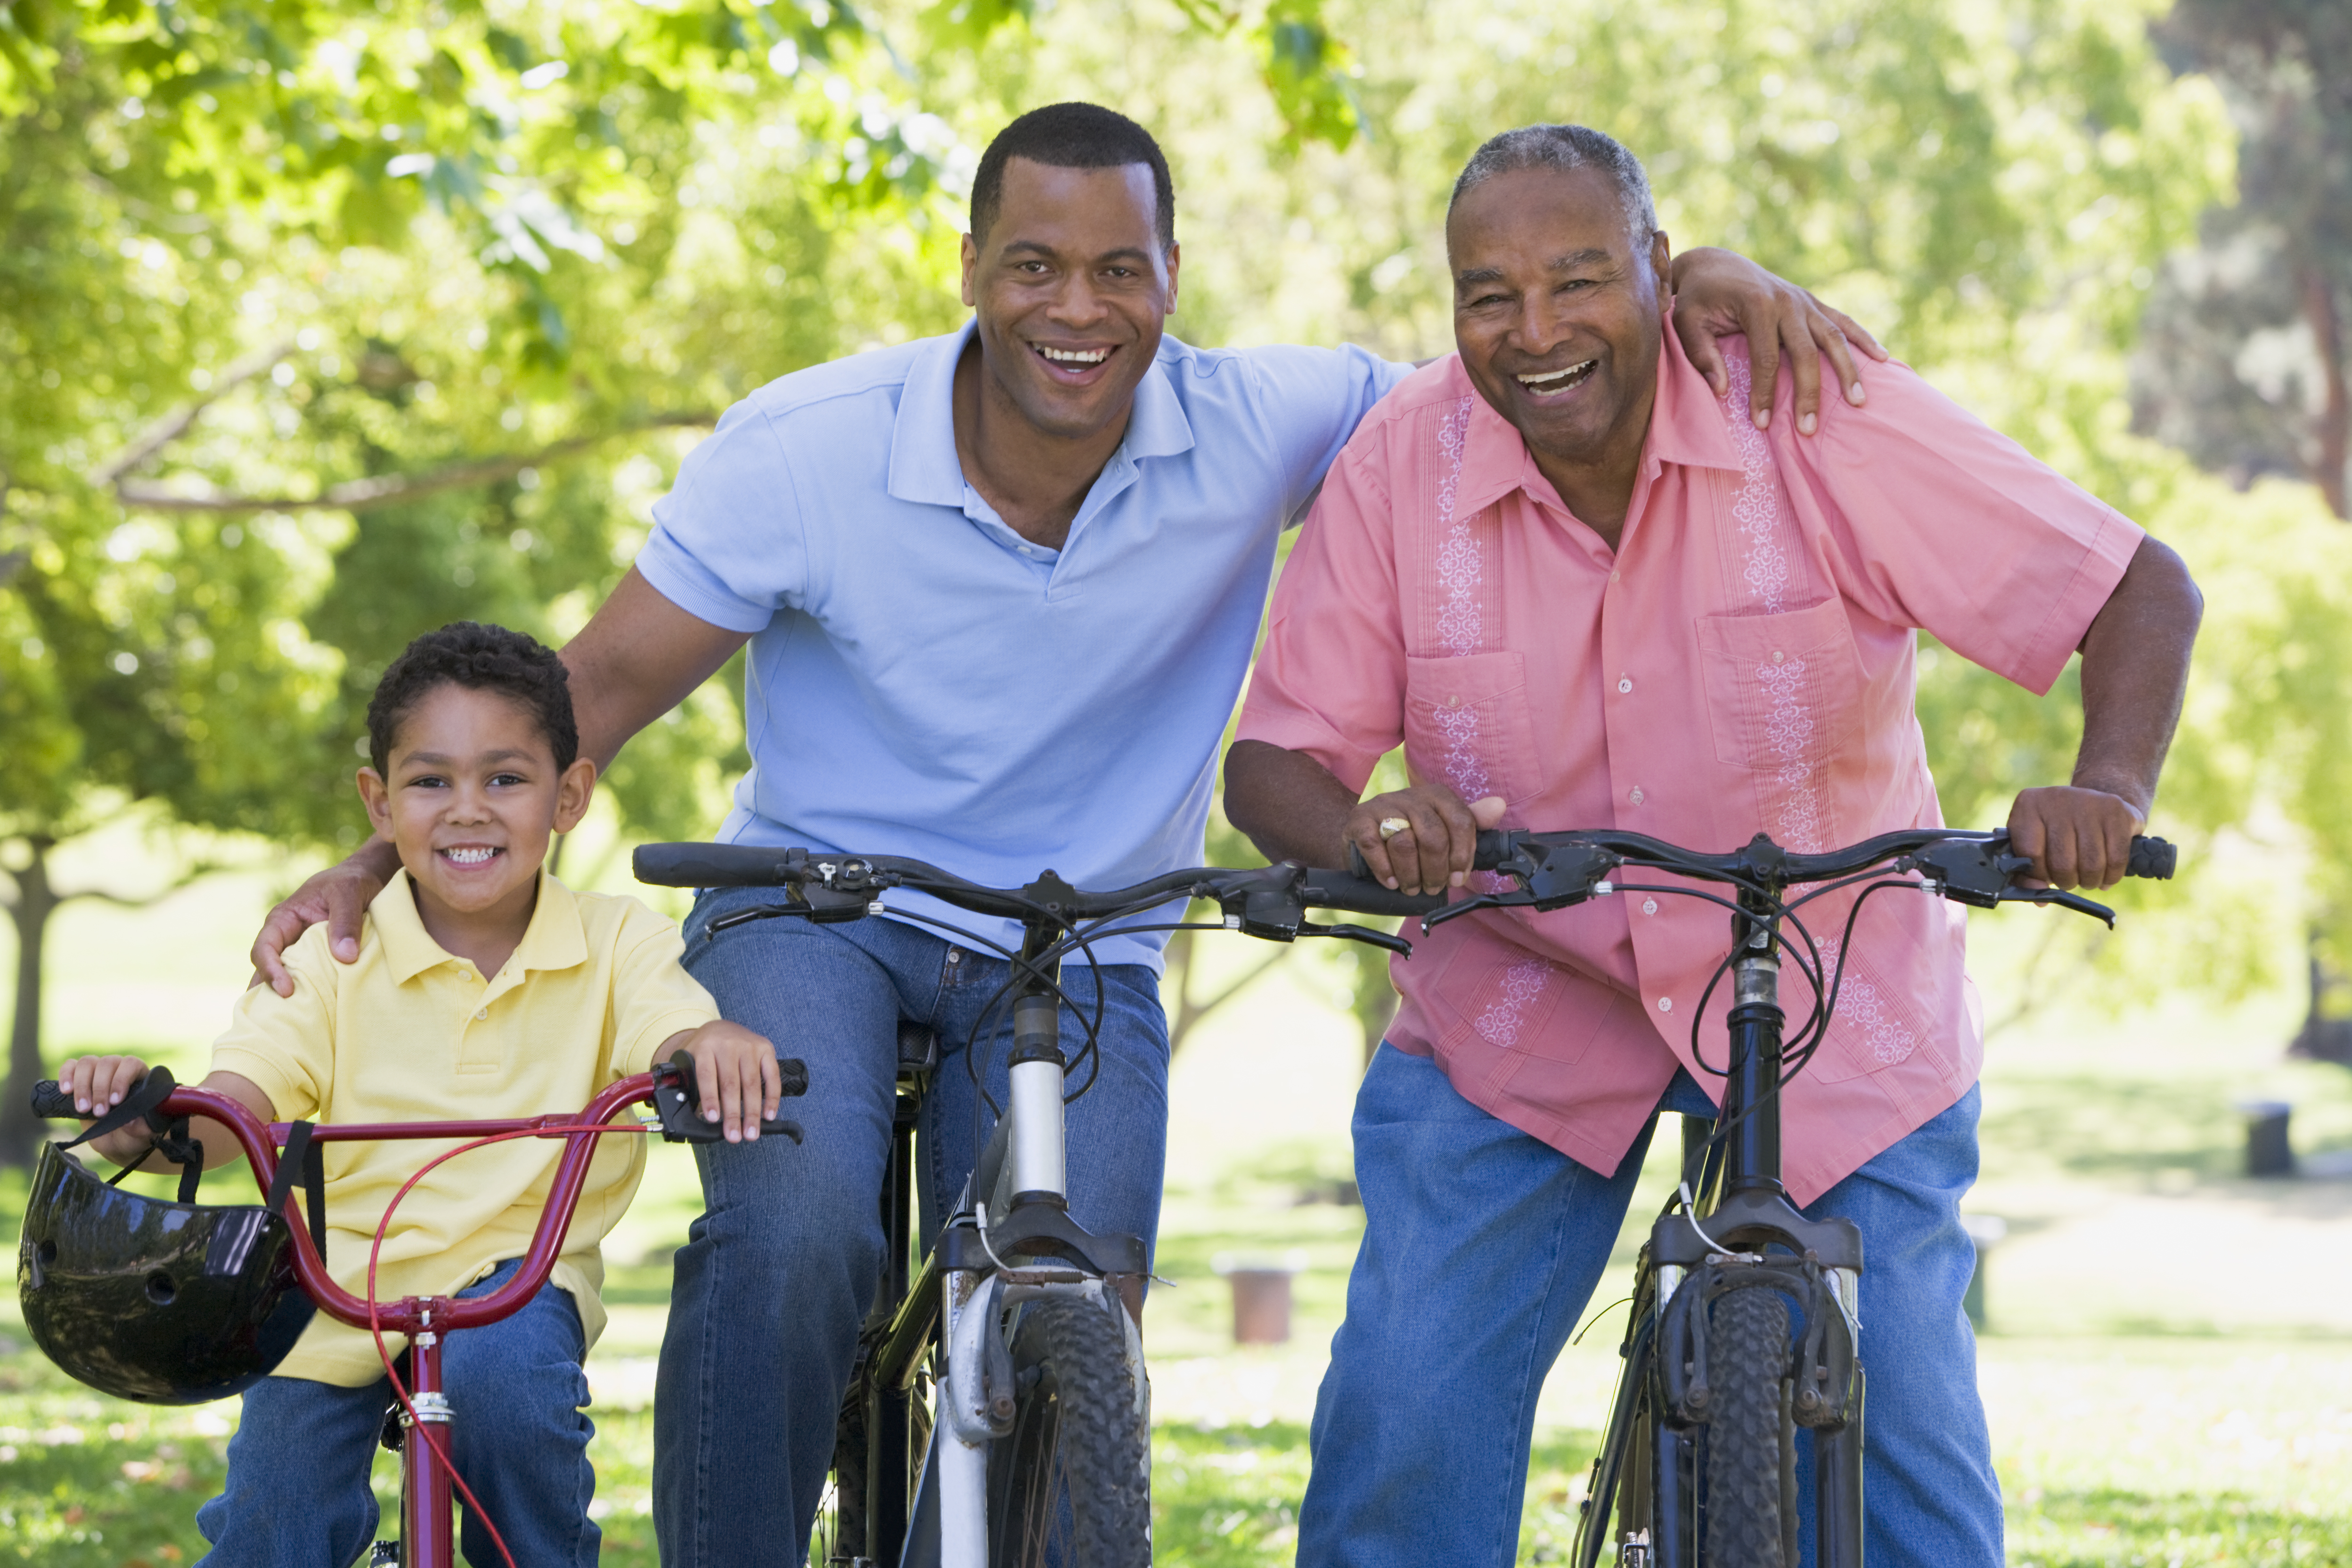 3 generations of males smiling and enjoying a bike ride together posing for the camera.